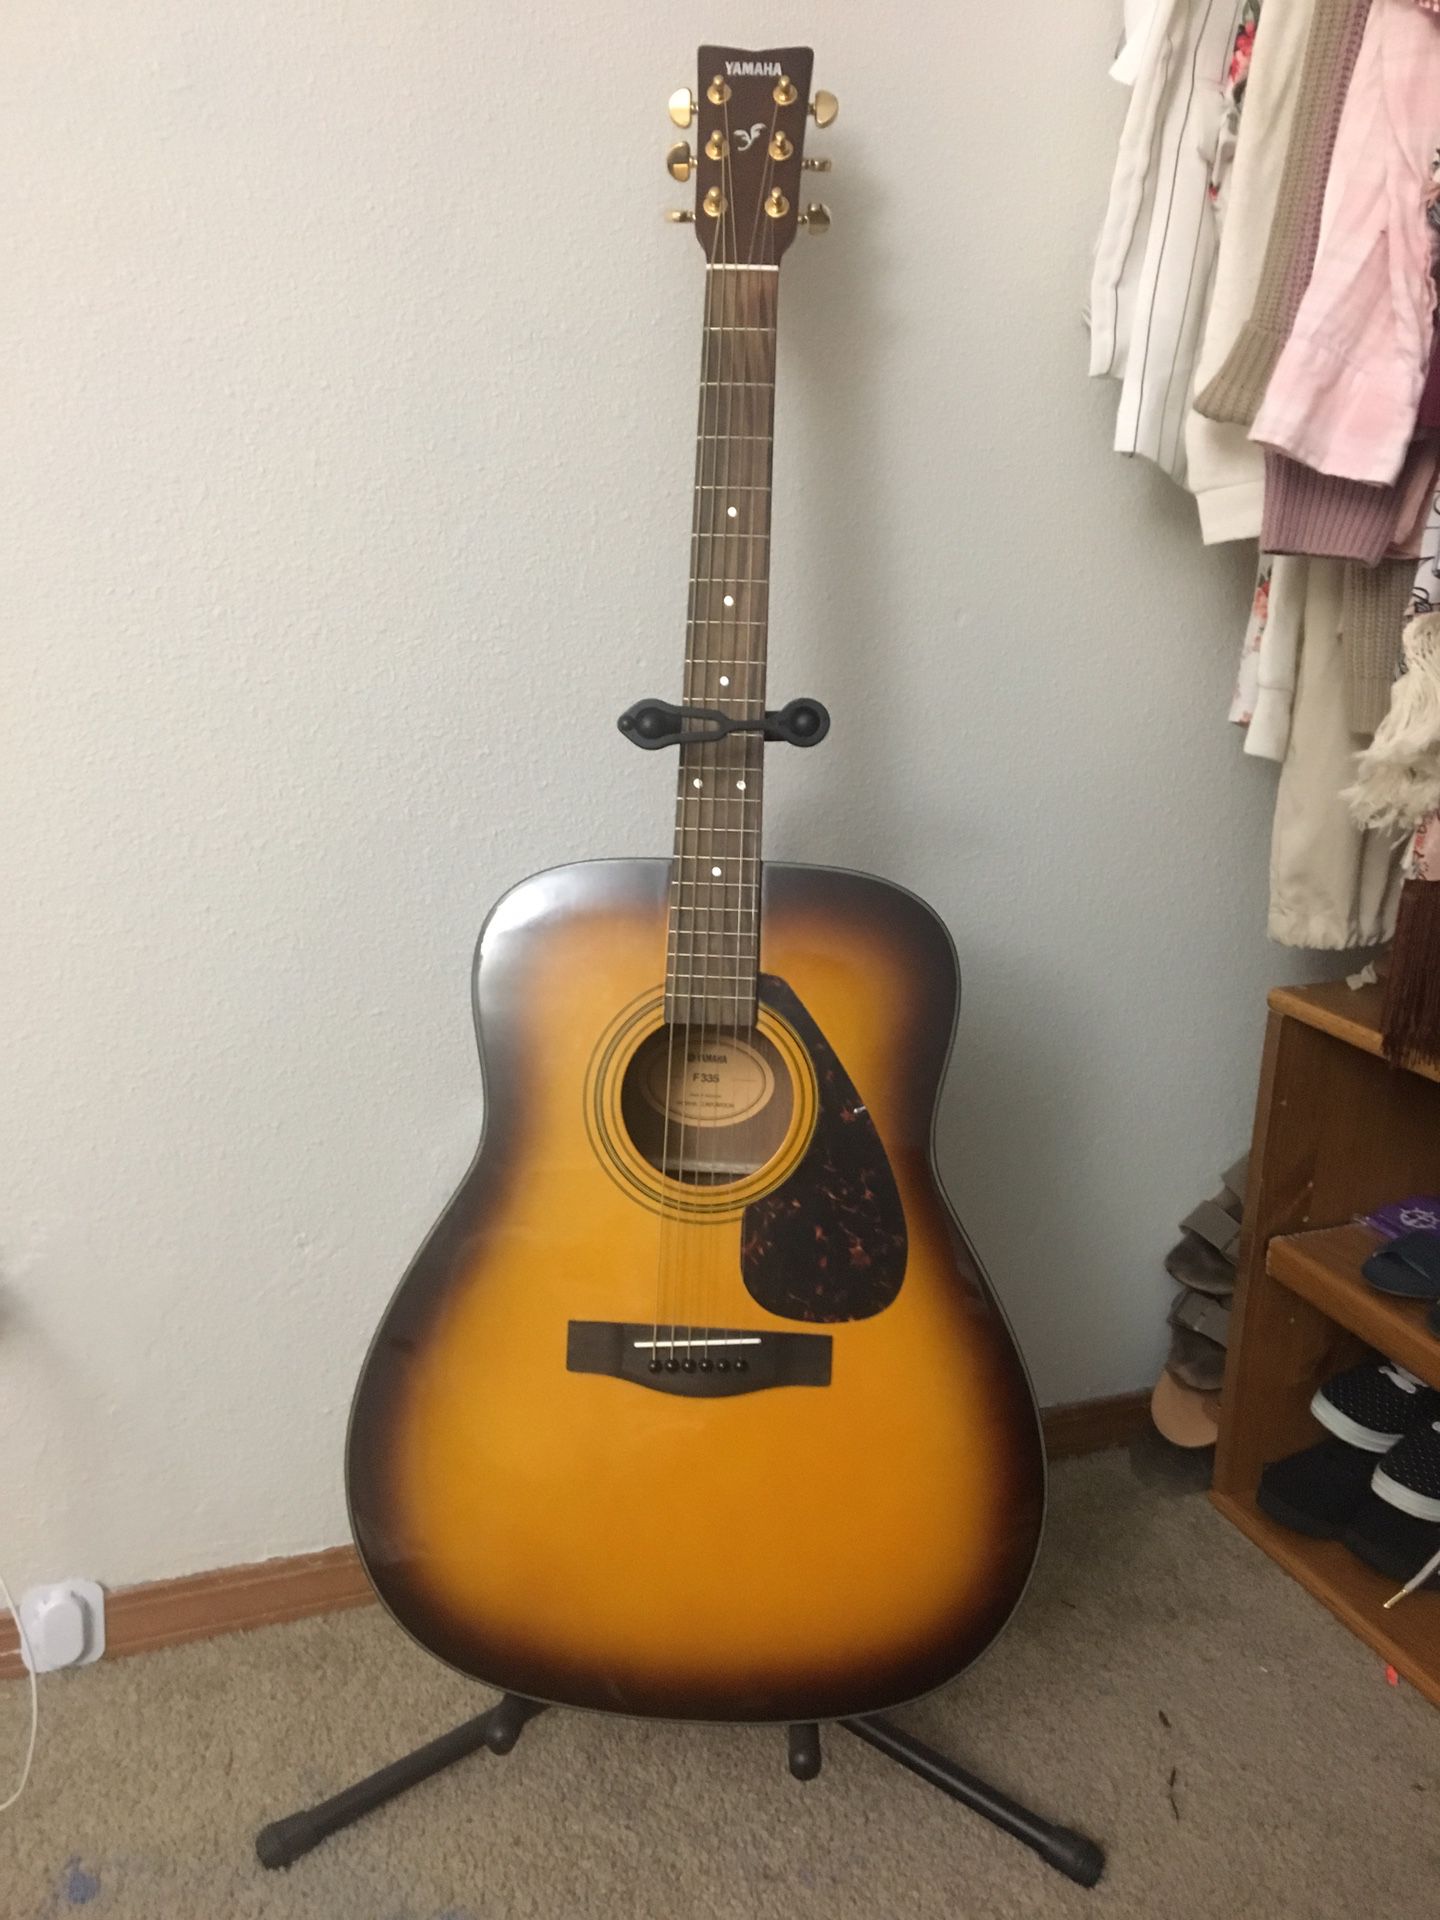 Yamaha F335 acoustic guitar with all accessories TAKING BEST OFFER